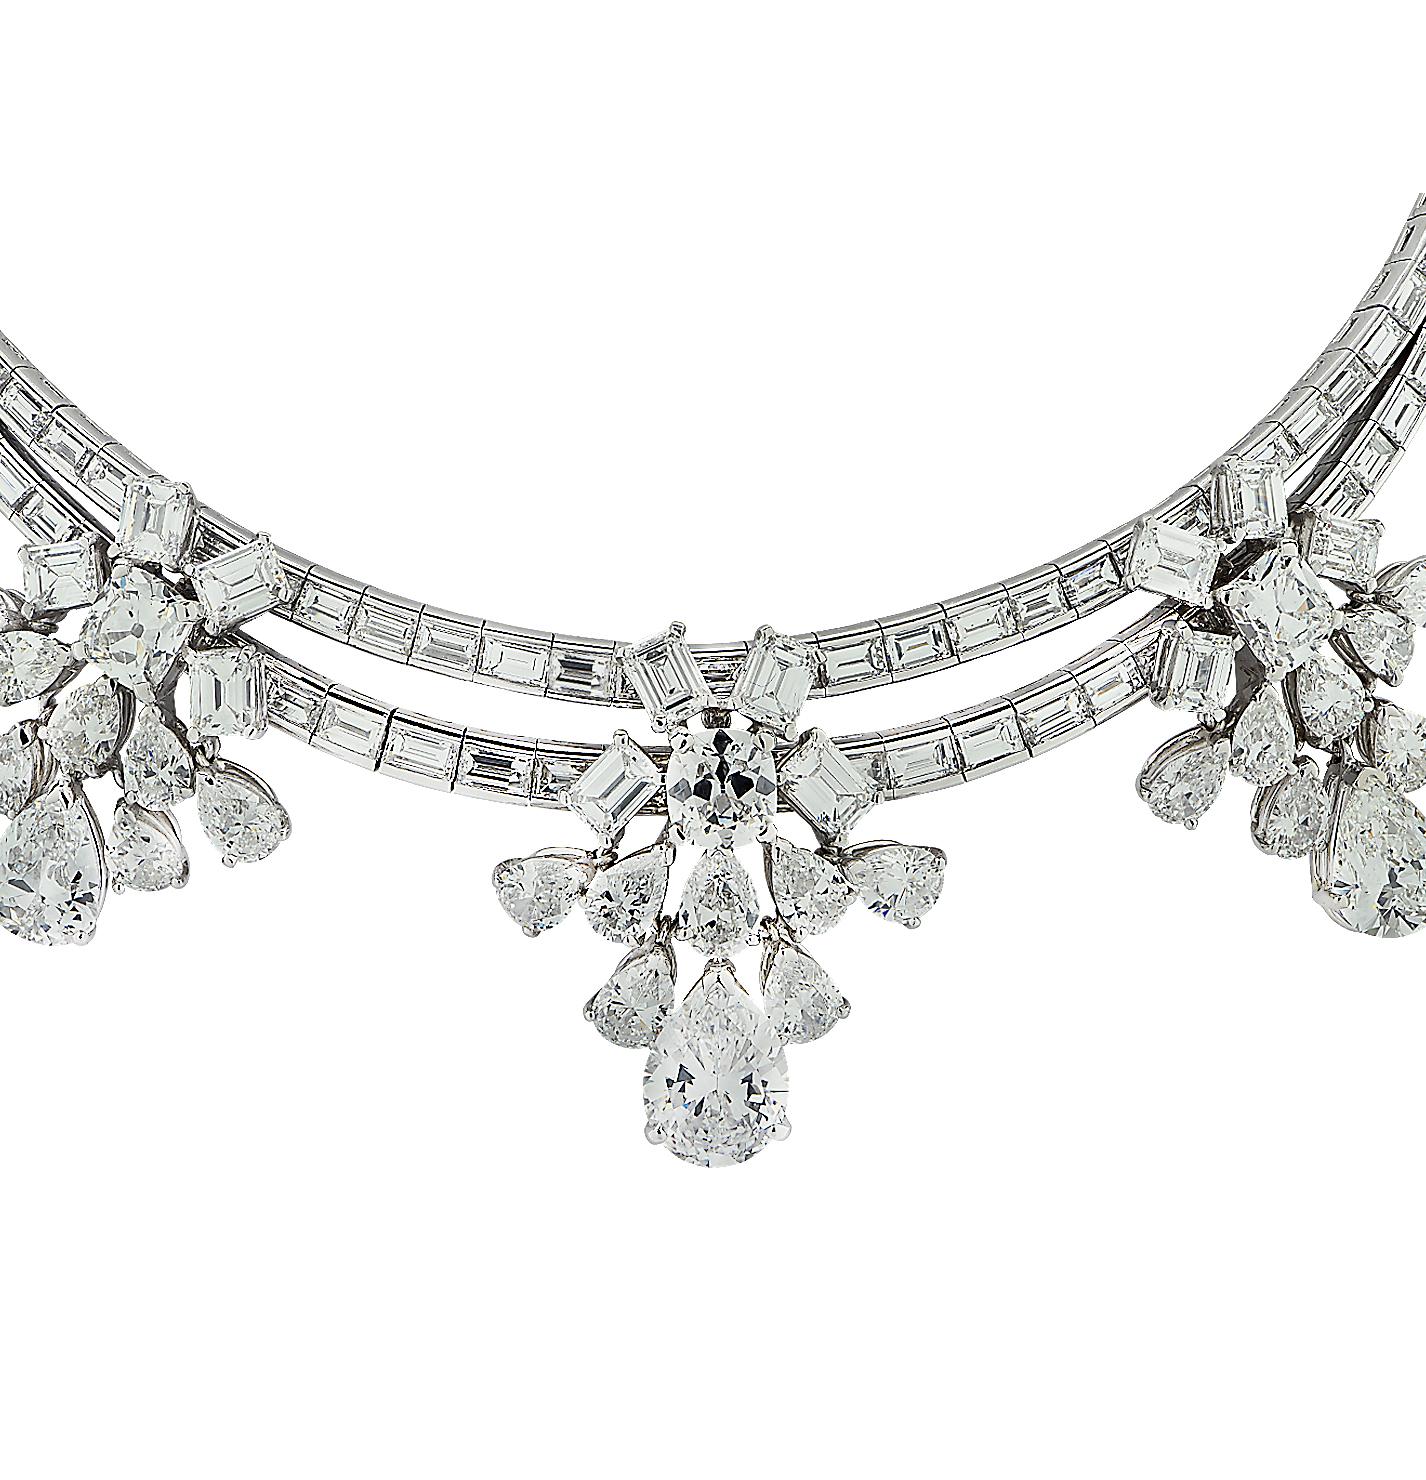 Exquisite diamond cluster necklace crafted in platinum showcasing 153 mixed cut diamonds weighing approximately 49.36 carats total D-H color, VVS-SI clarity. Baguette cut diamonds adorned with three dazzling diamond cluster motifs swirl around the